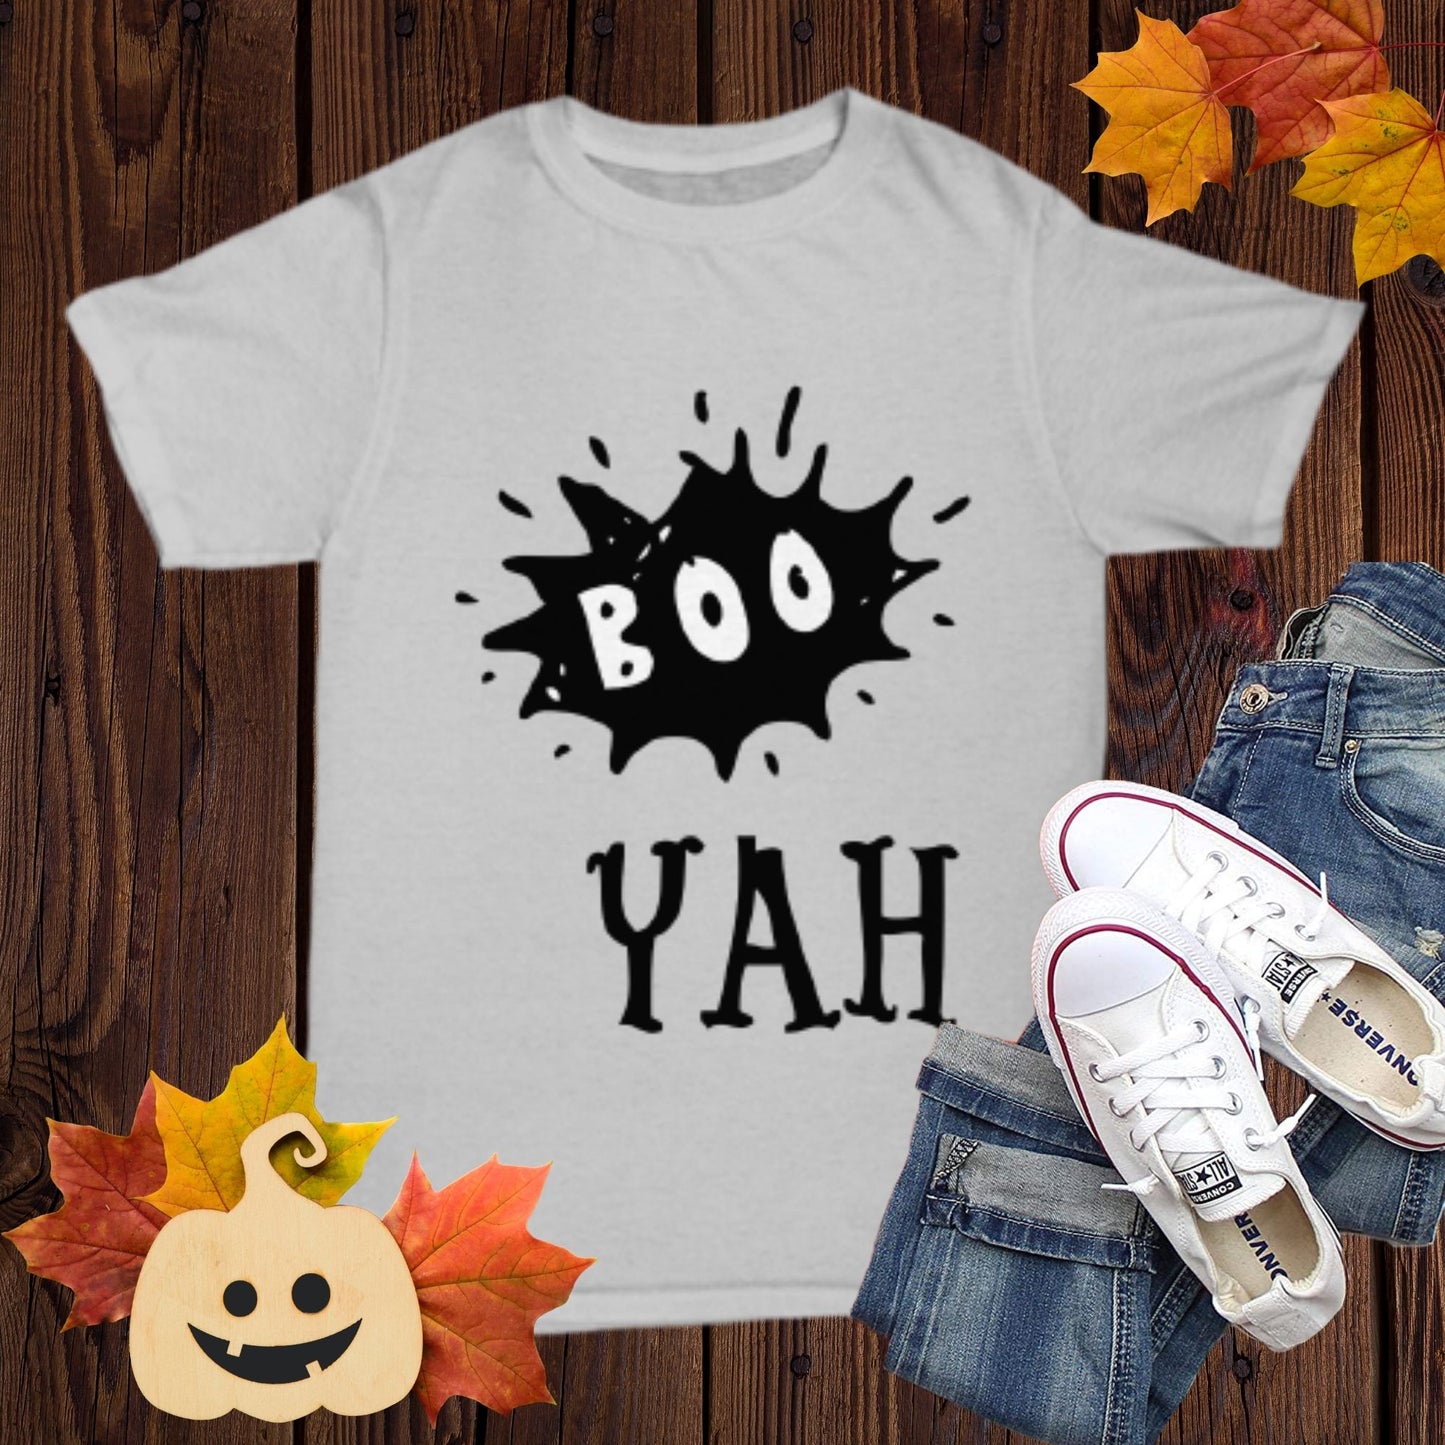 Halloween Funny T-shirt Costume Unisex Gothic shirt with sayings Boo Yah!